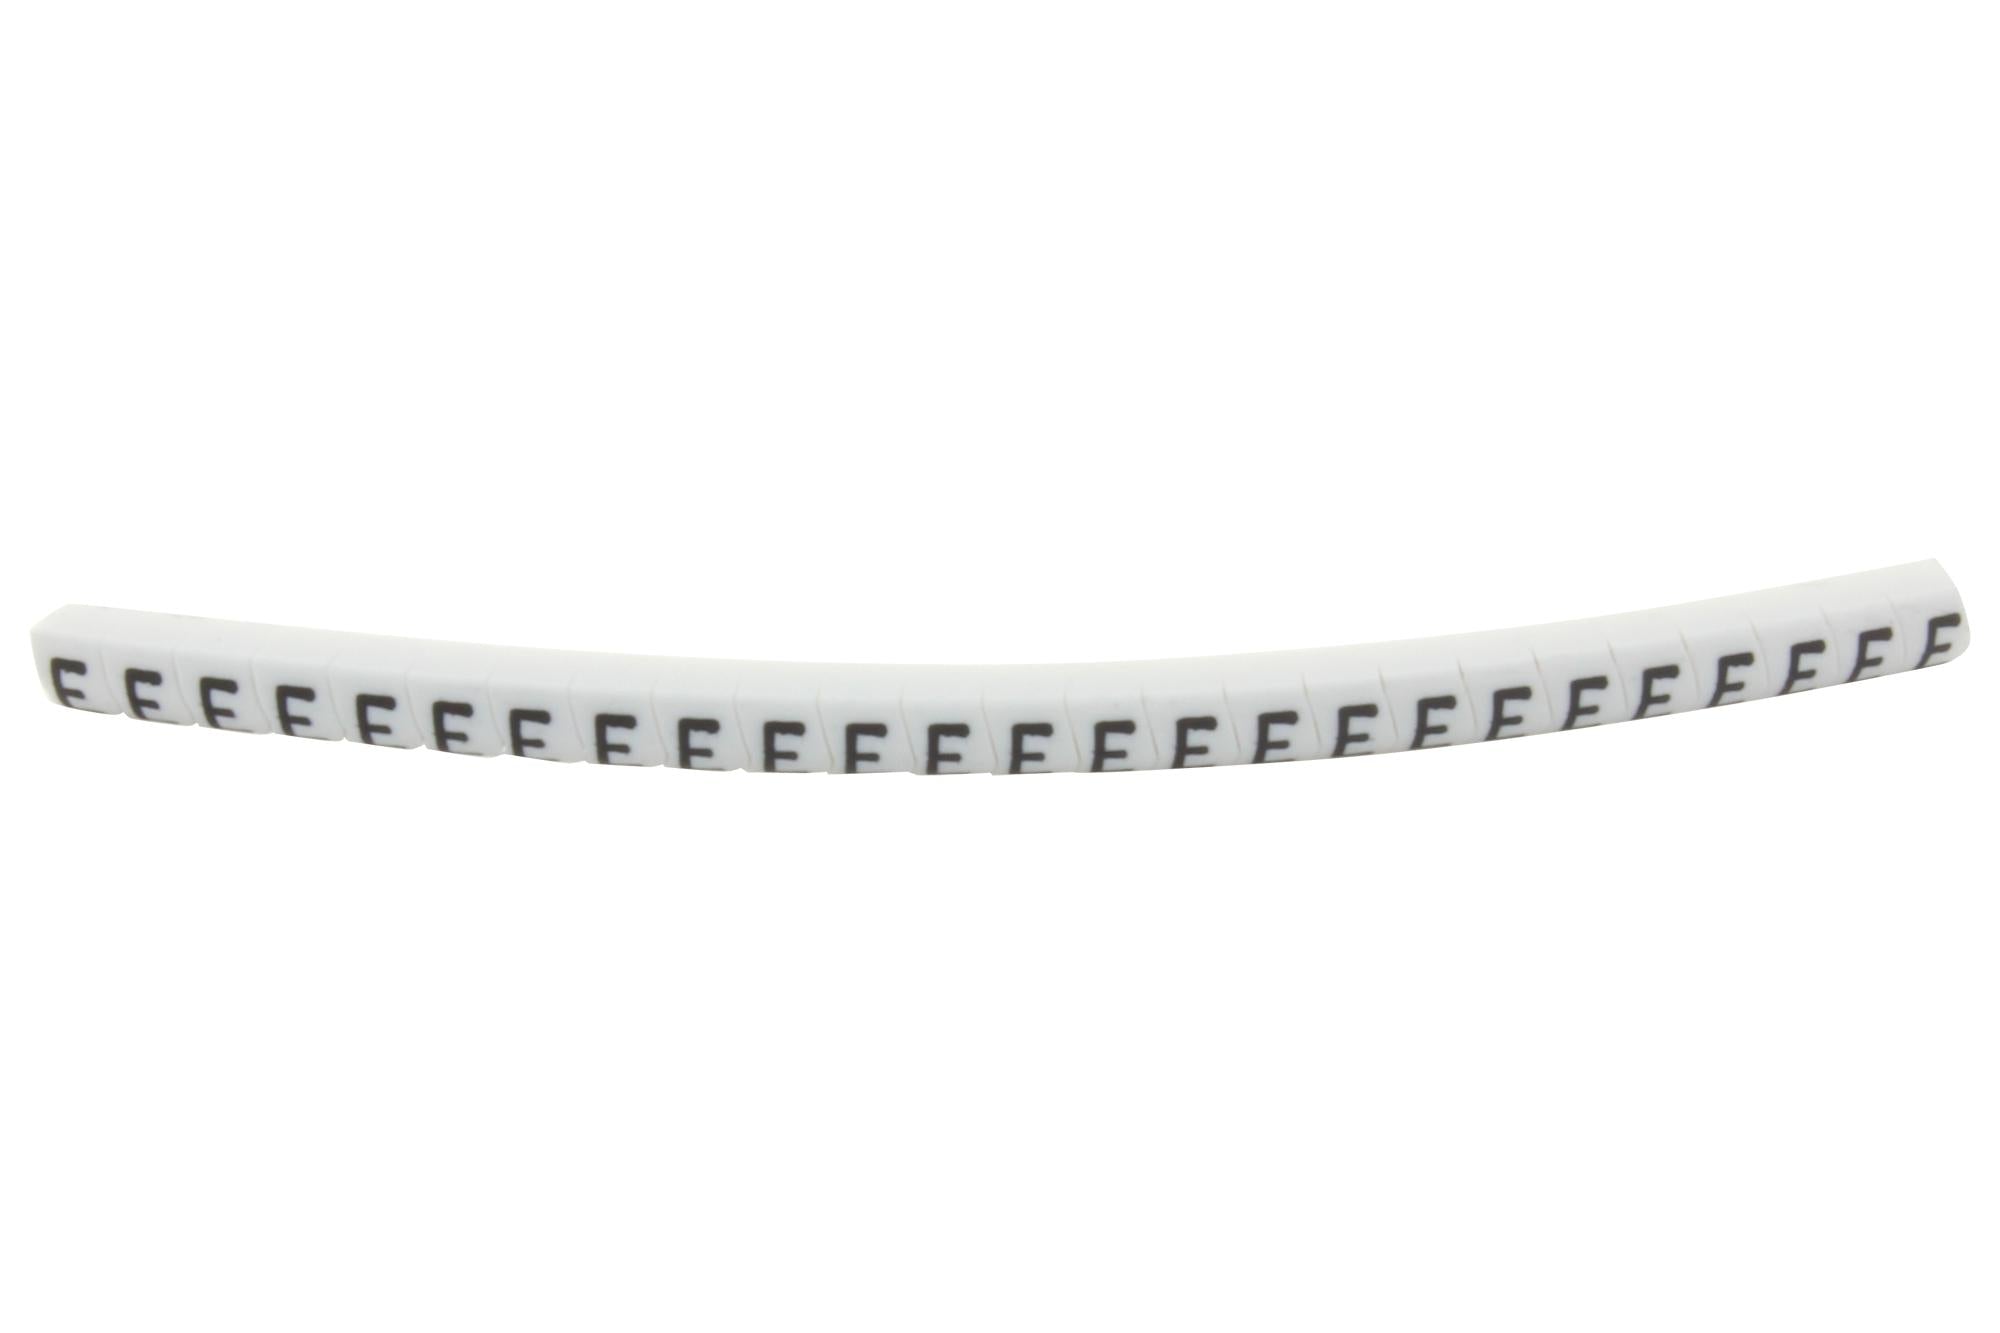 901-11078 CABLE MARKER, PRE PRINTED, PVC, WHITE HELLERMANNTYTON